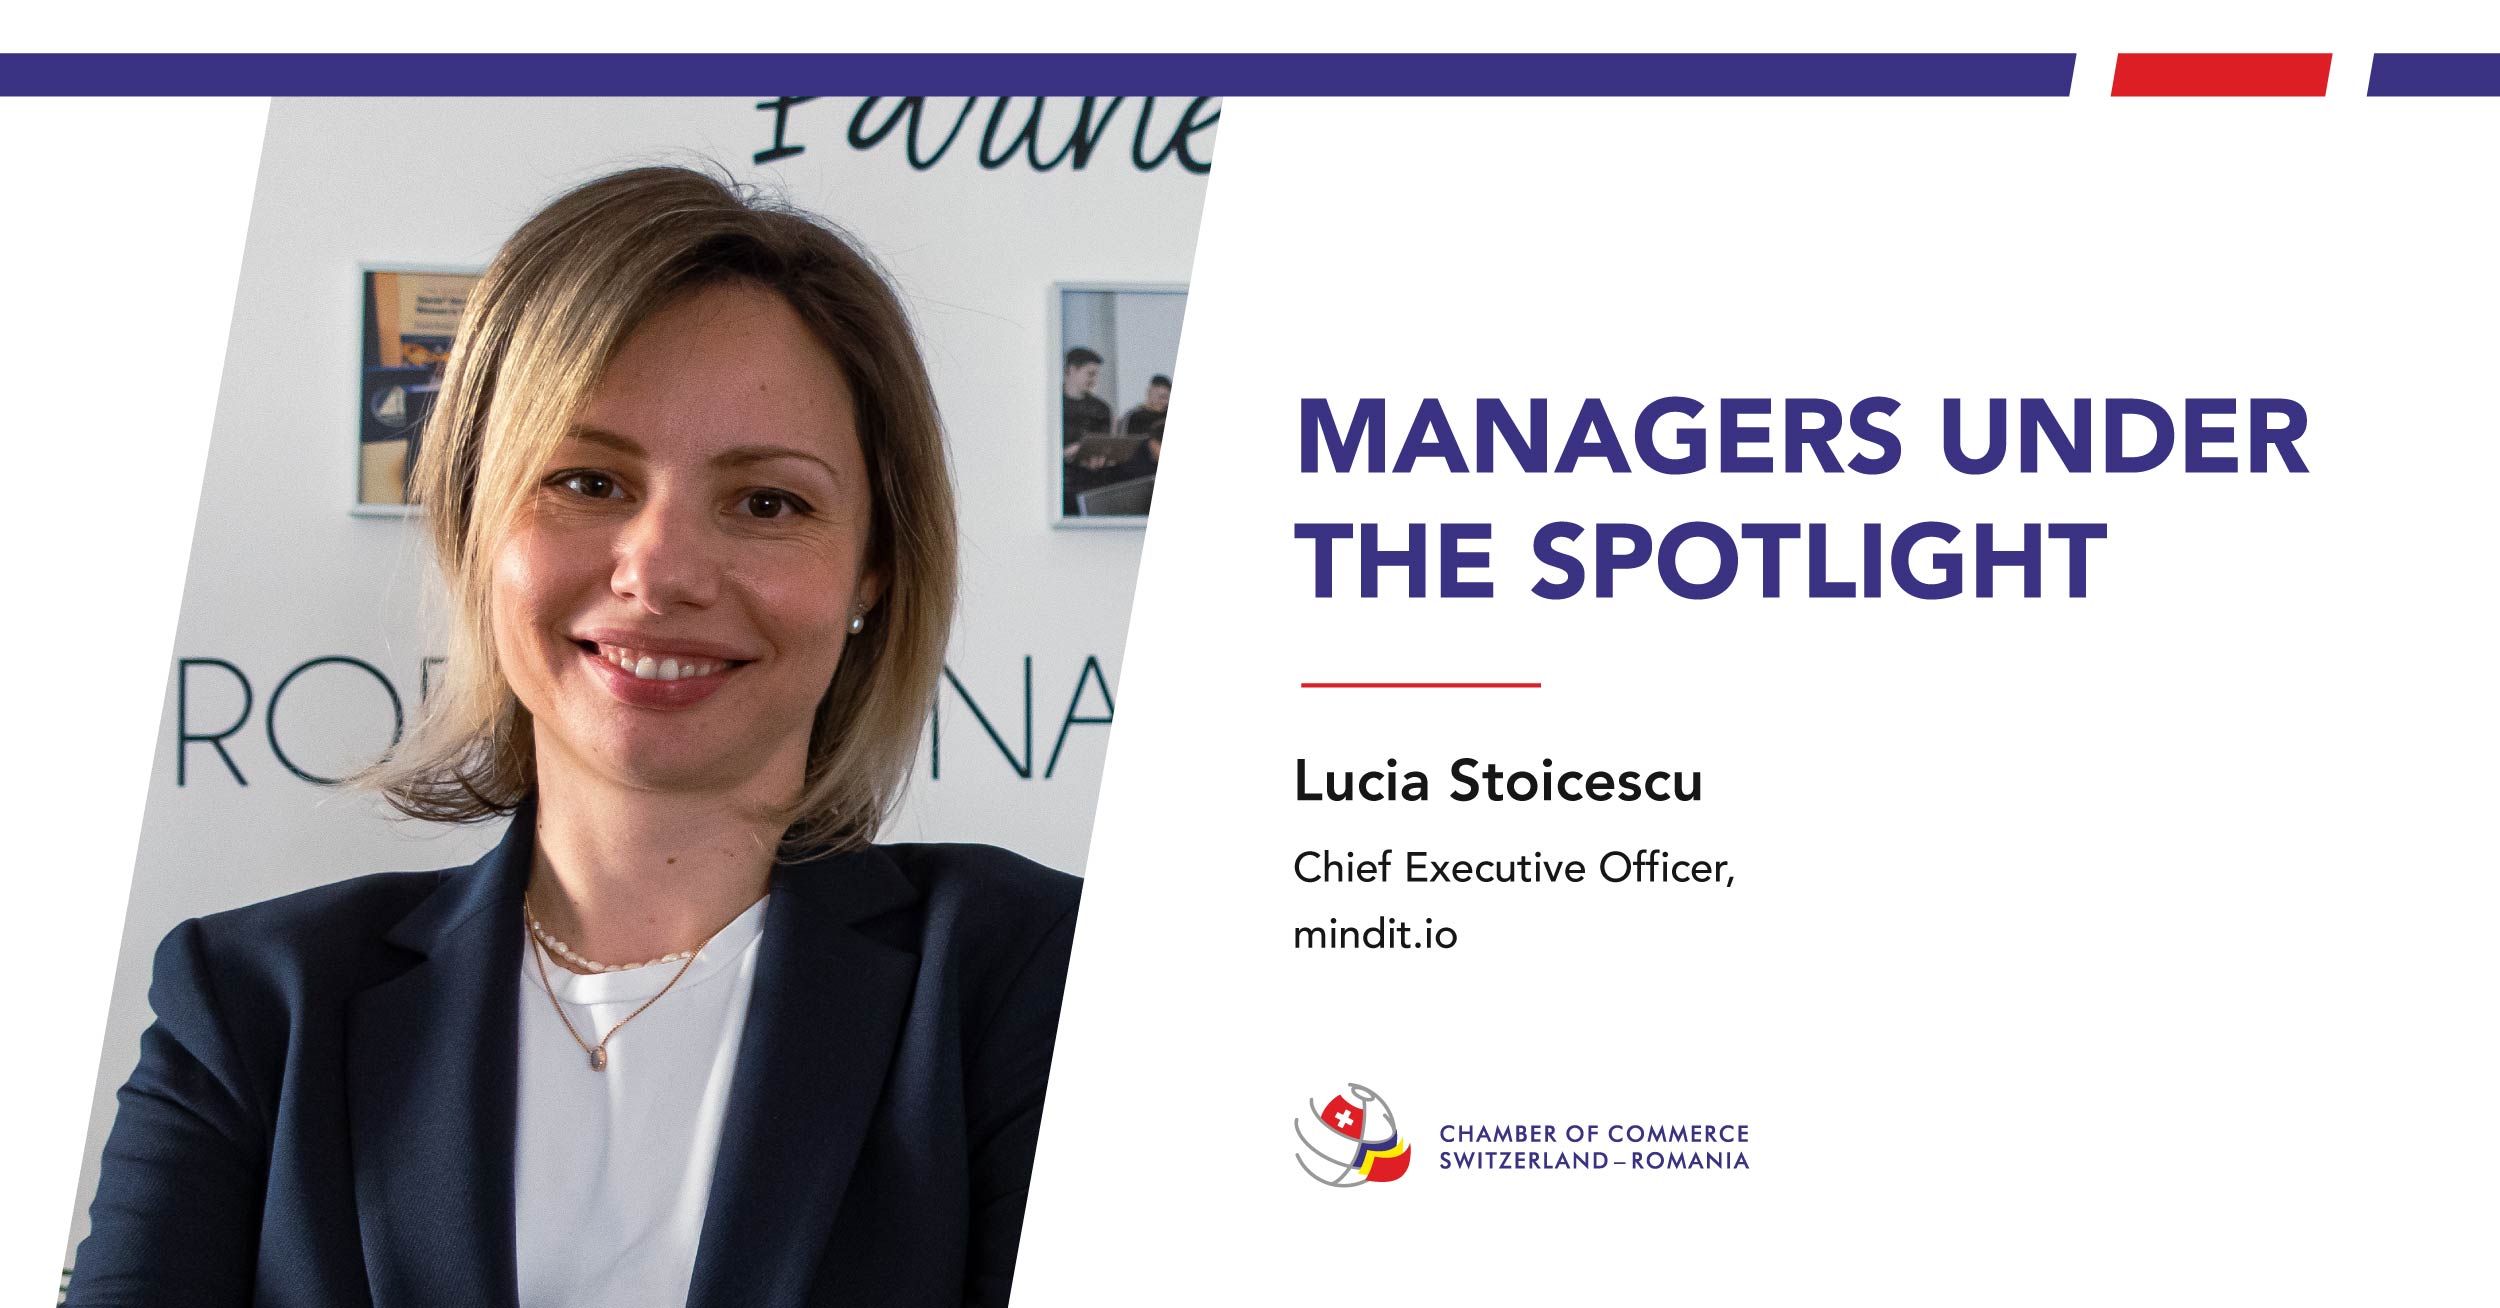 Managers under the spotlight - Lucia Stoicescu, CEO mindit.io